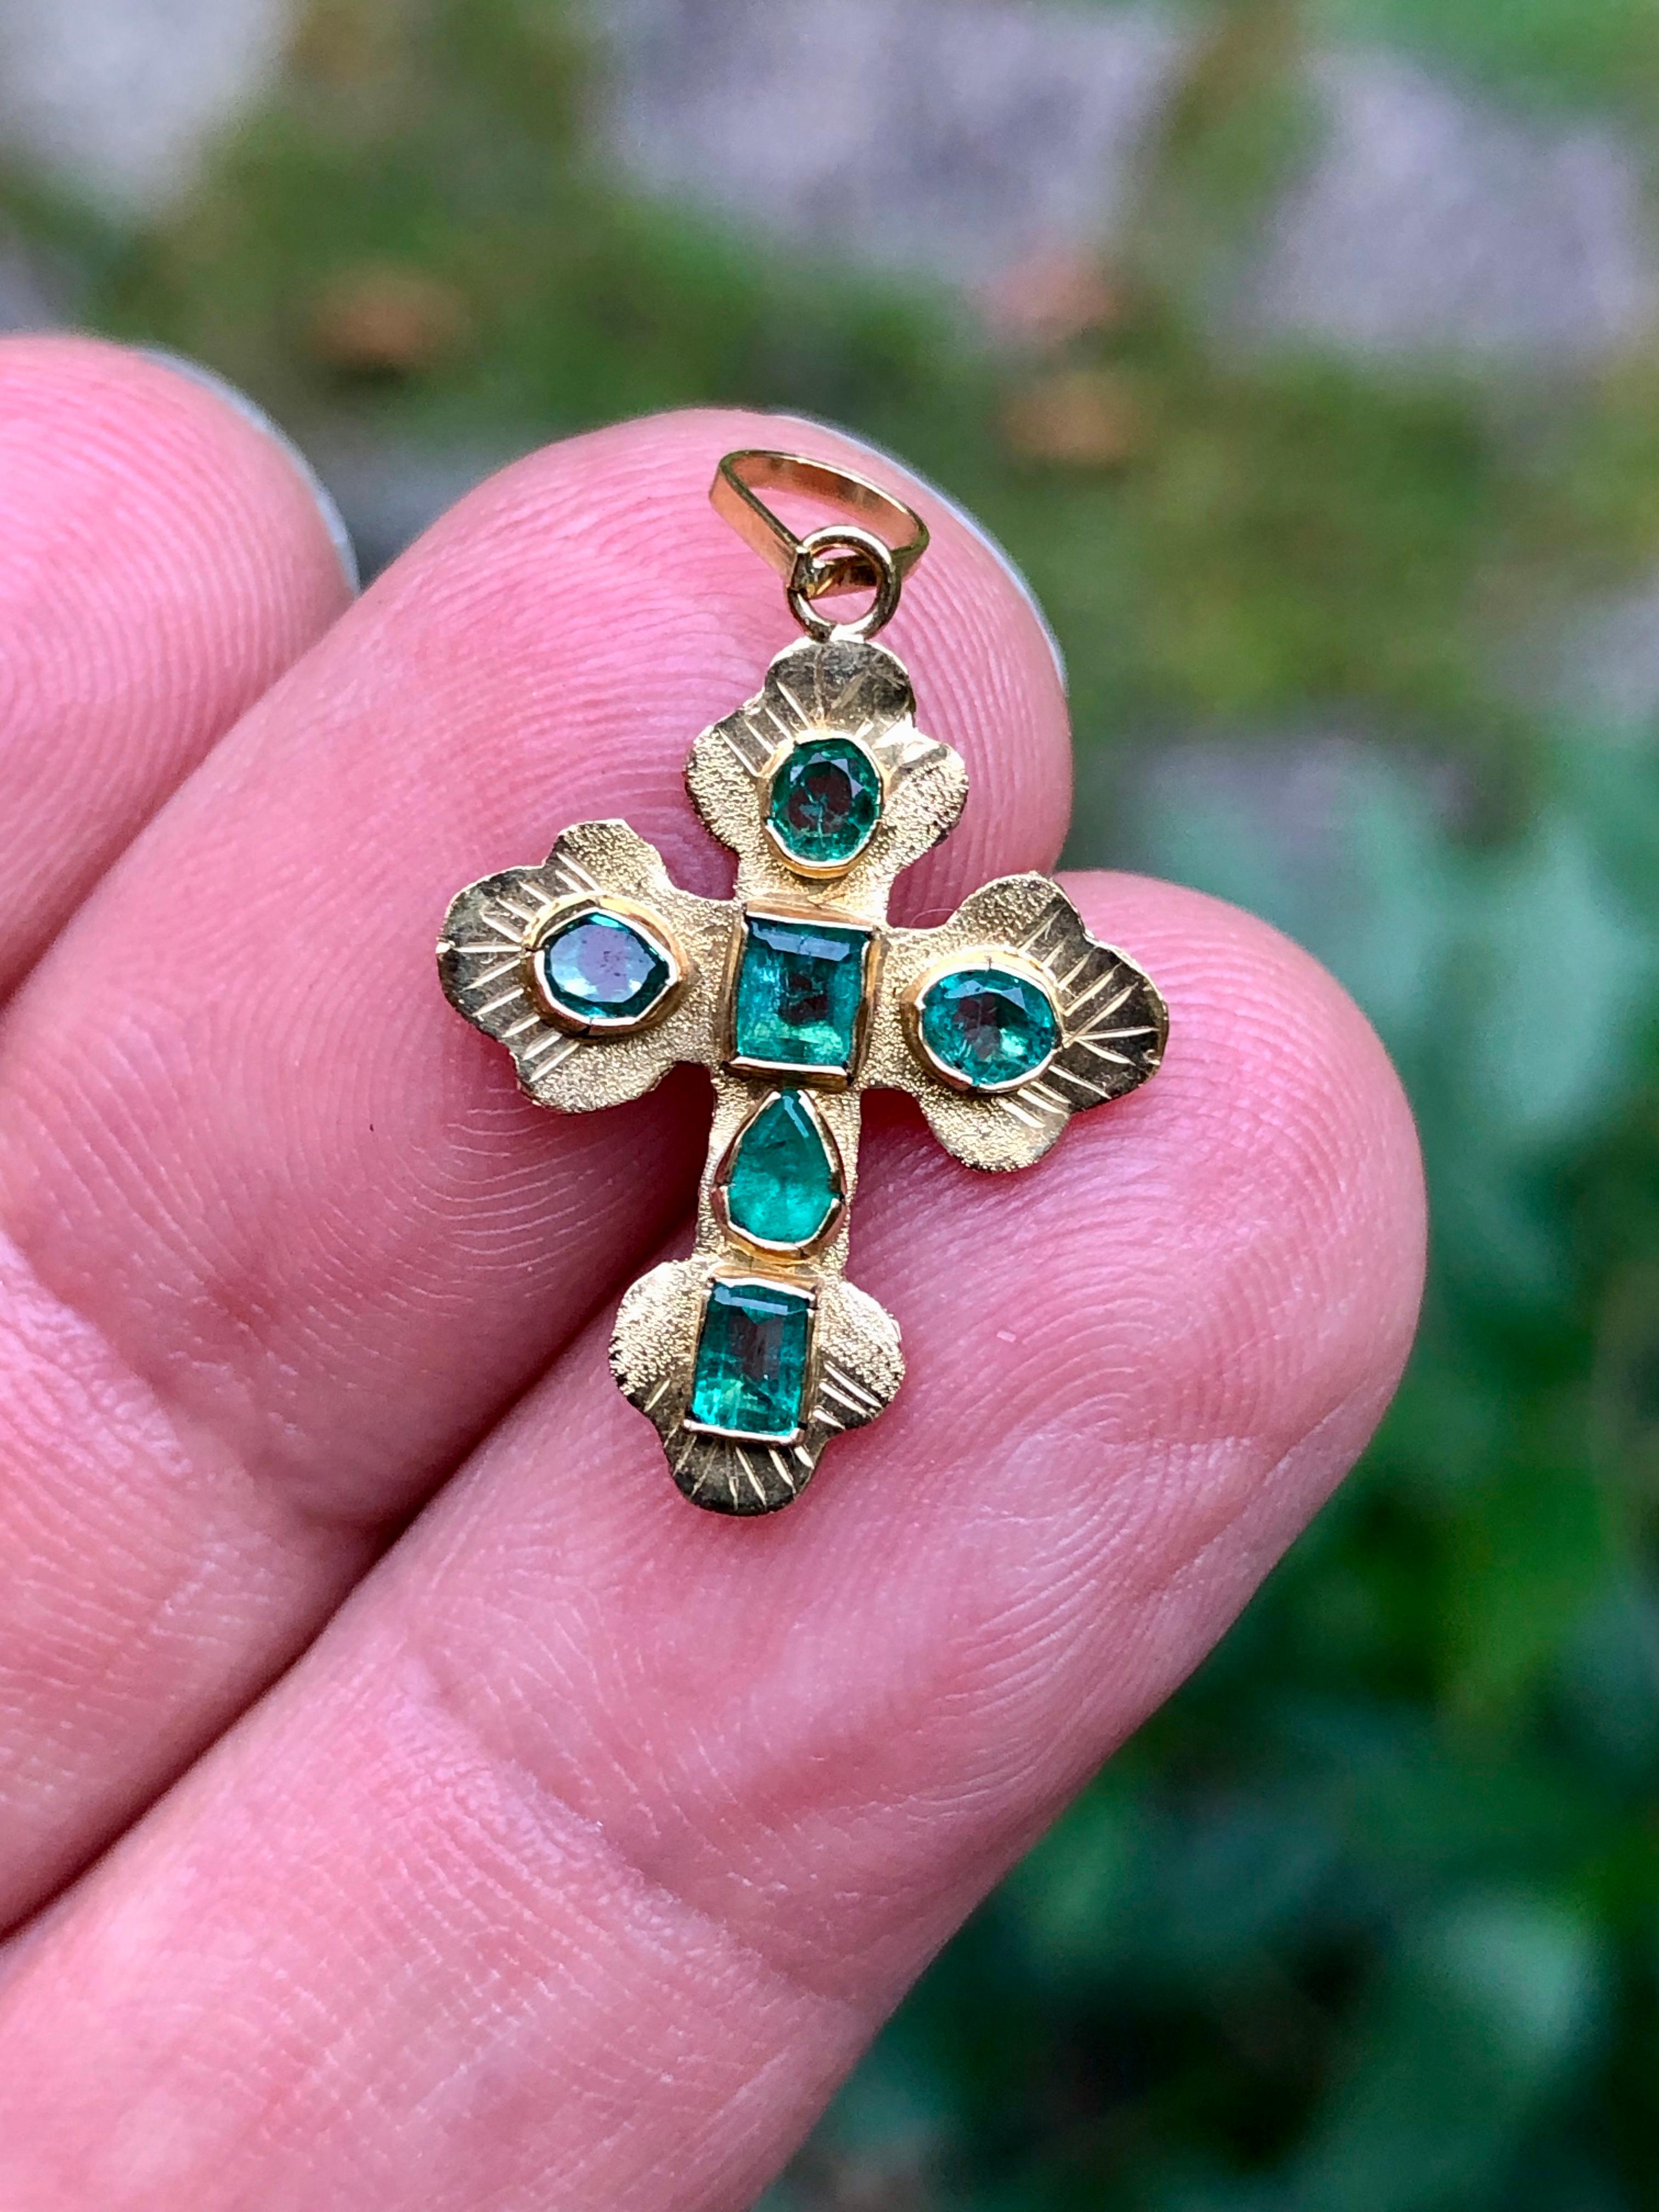 18k Yellow Gold Green Colombian Emerald Cross Charm Pendant
Very nice cross pendant in 18k yellow gold. The cross holds genuine green Colombian Emeralds. 
Estate Excellent Condition
Weight: Approx. 1g
Size: 1